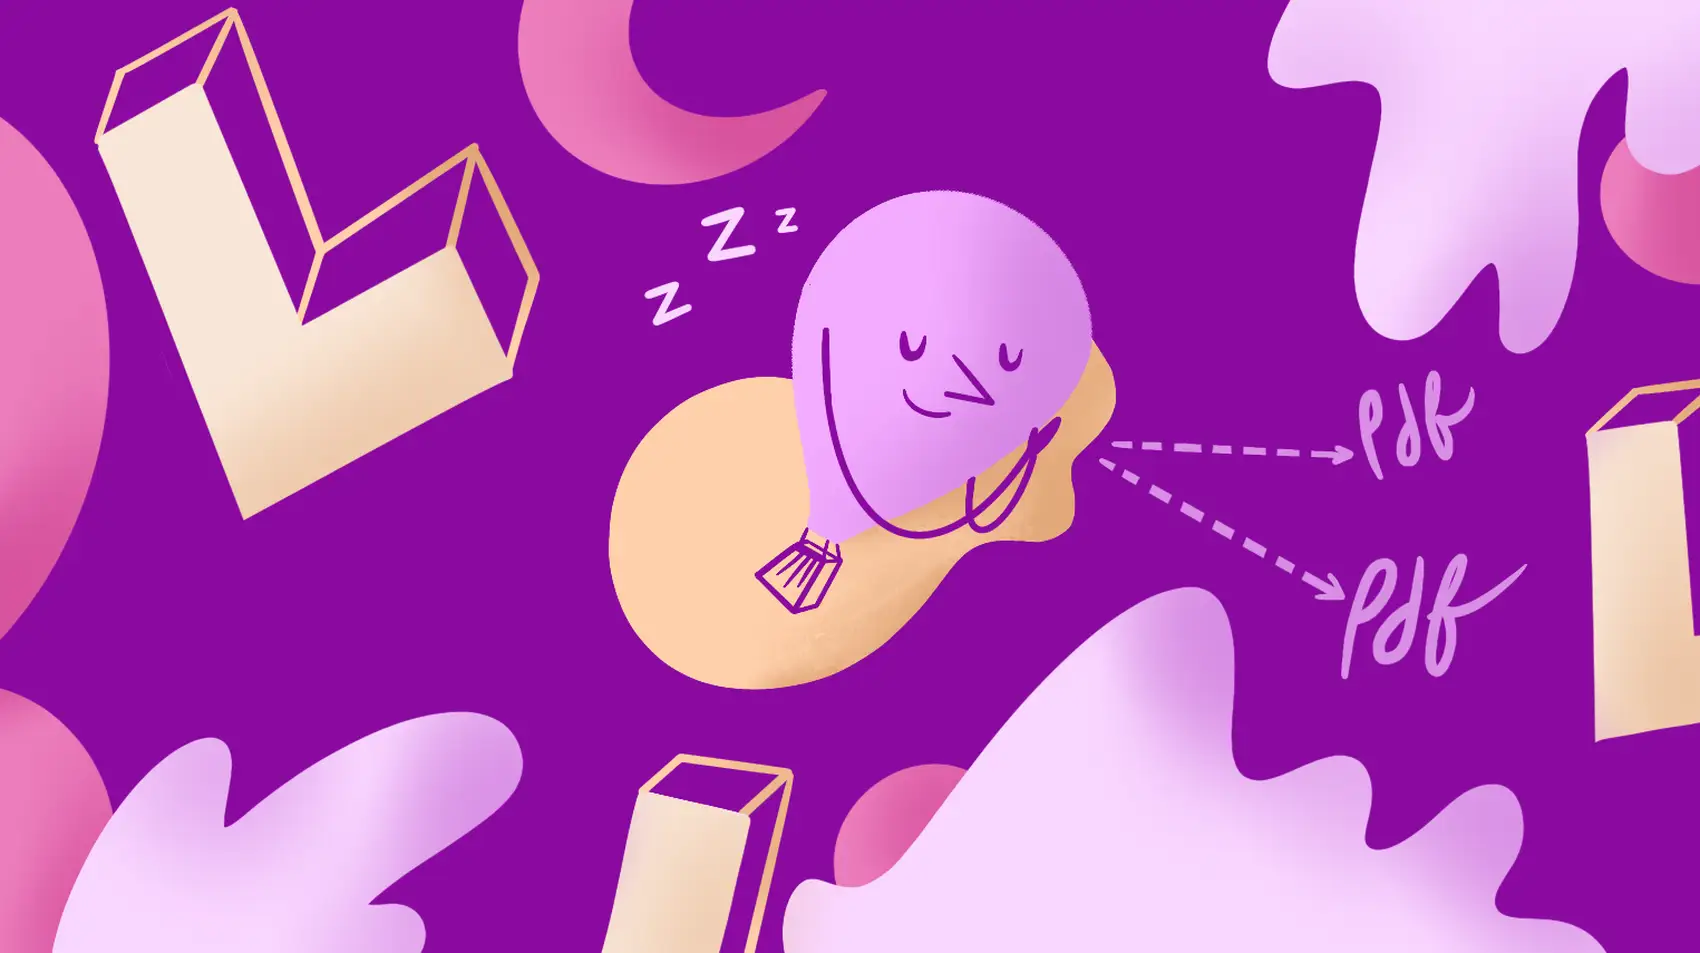 A balloon is sleeping and dreaming about pdf's. It represents a Fly.io machine because those can go to sleep in between jobs.